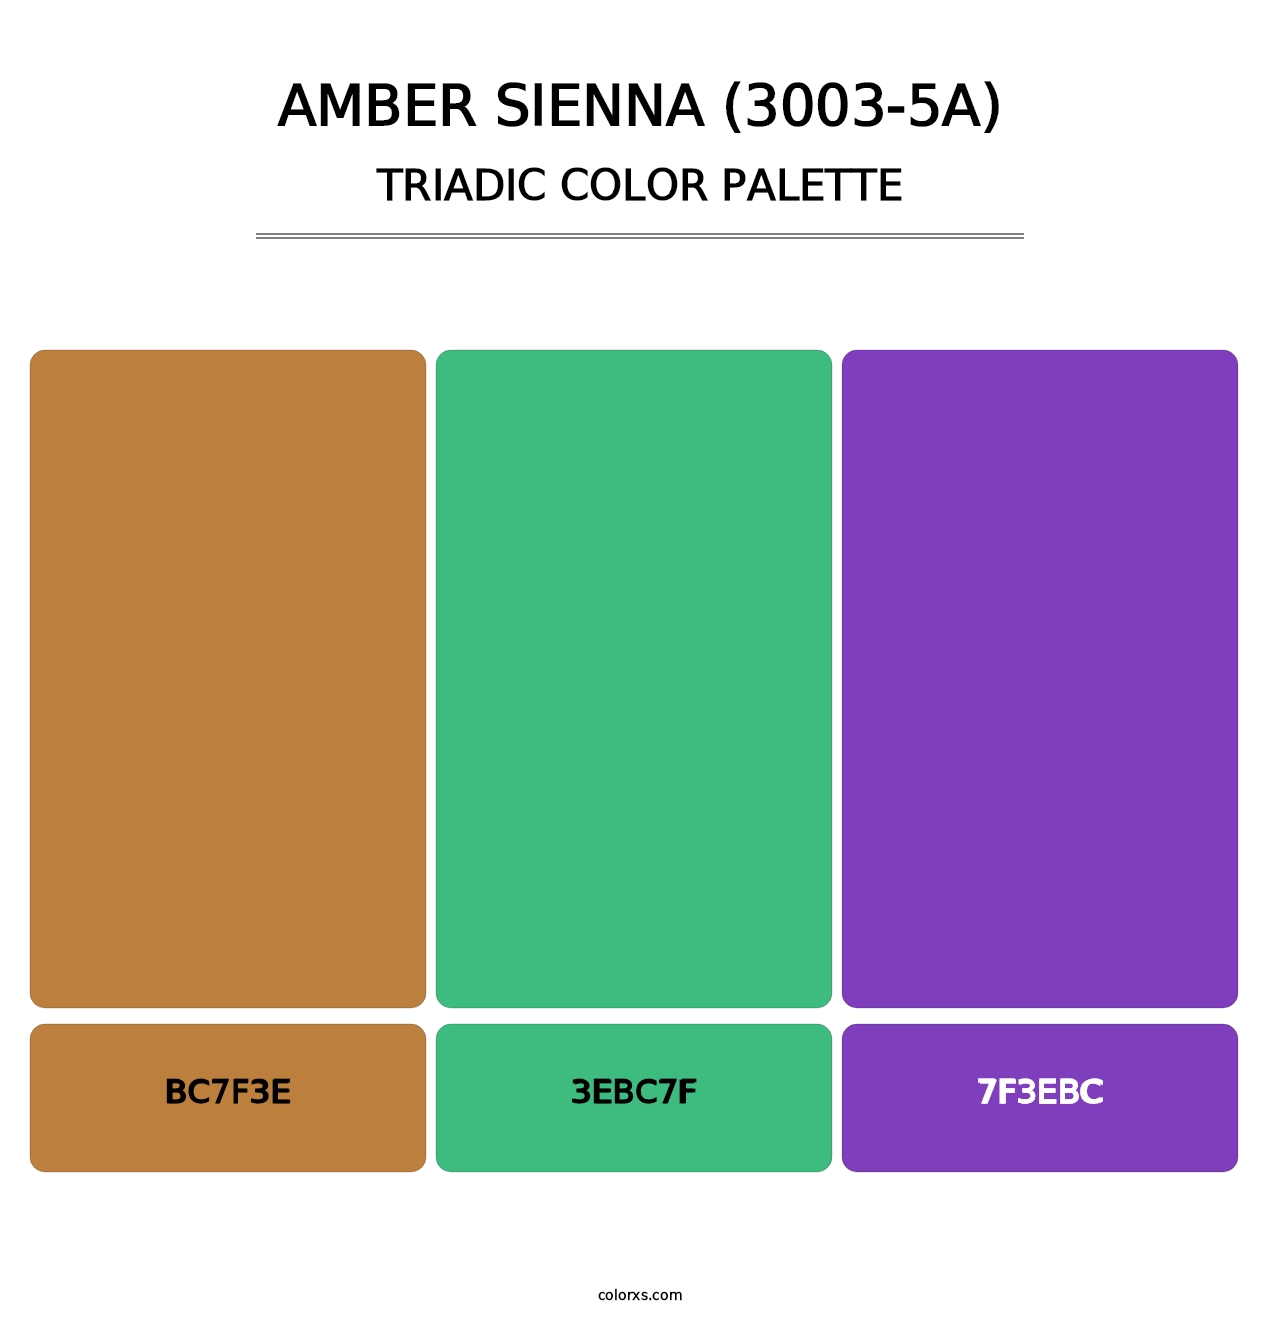 Amber Sienna (3003-5A) - Triadic Color Palette